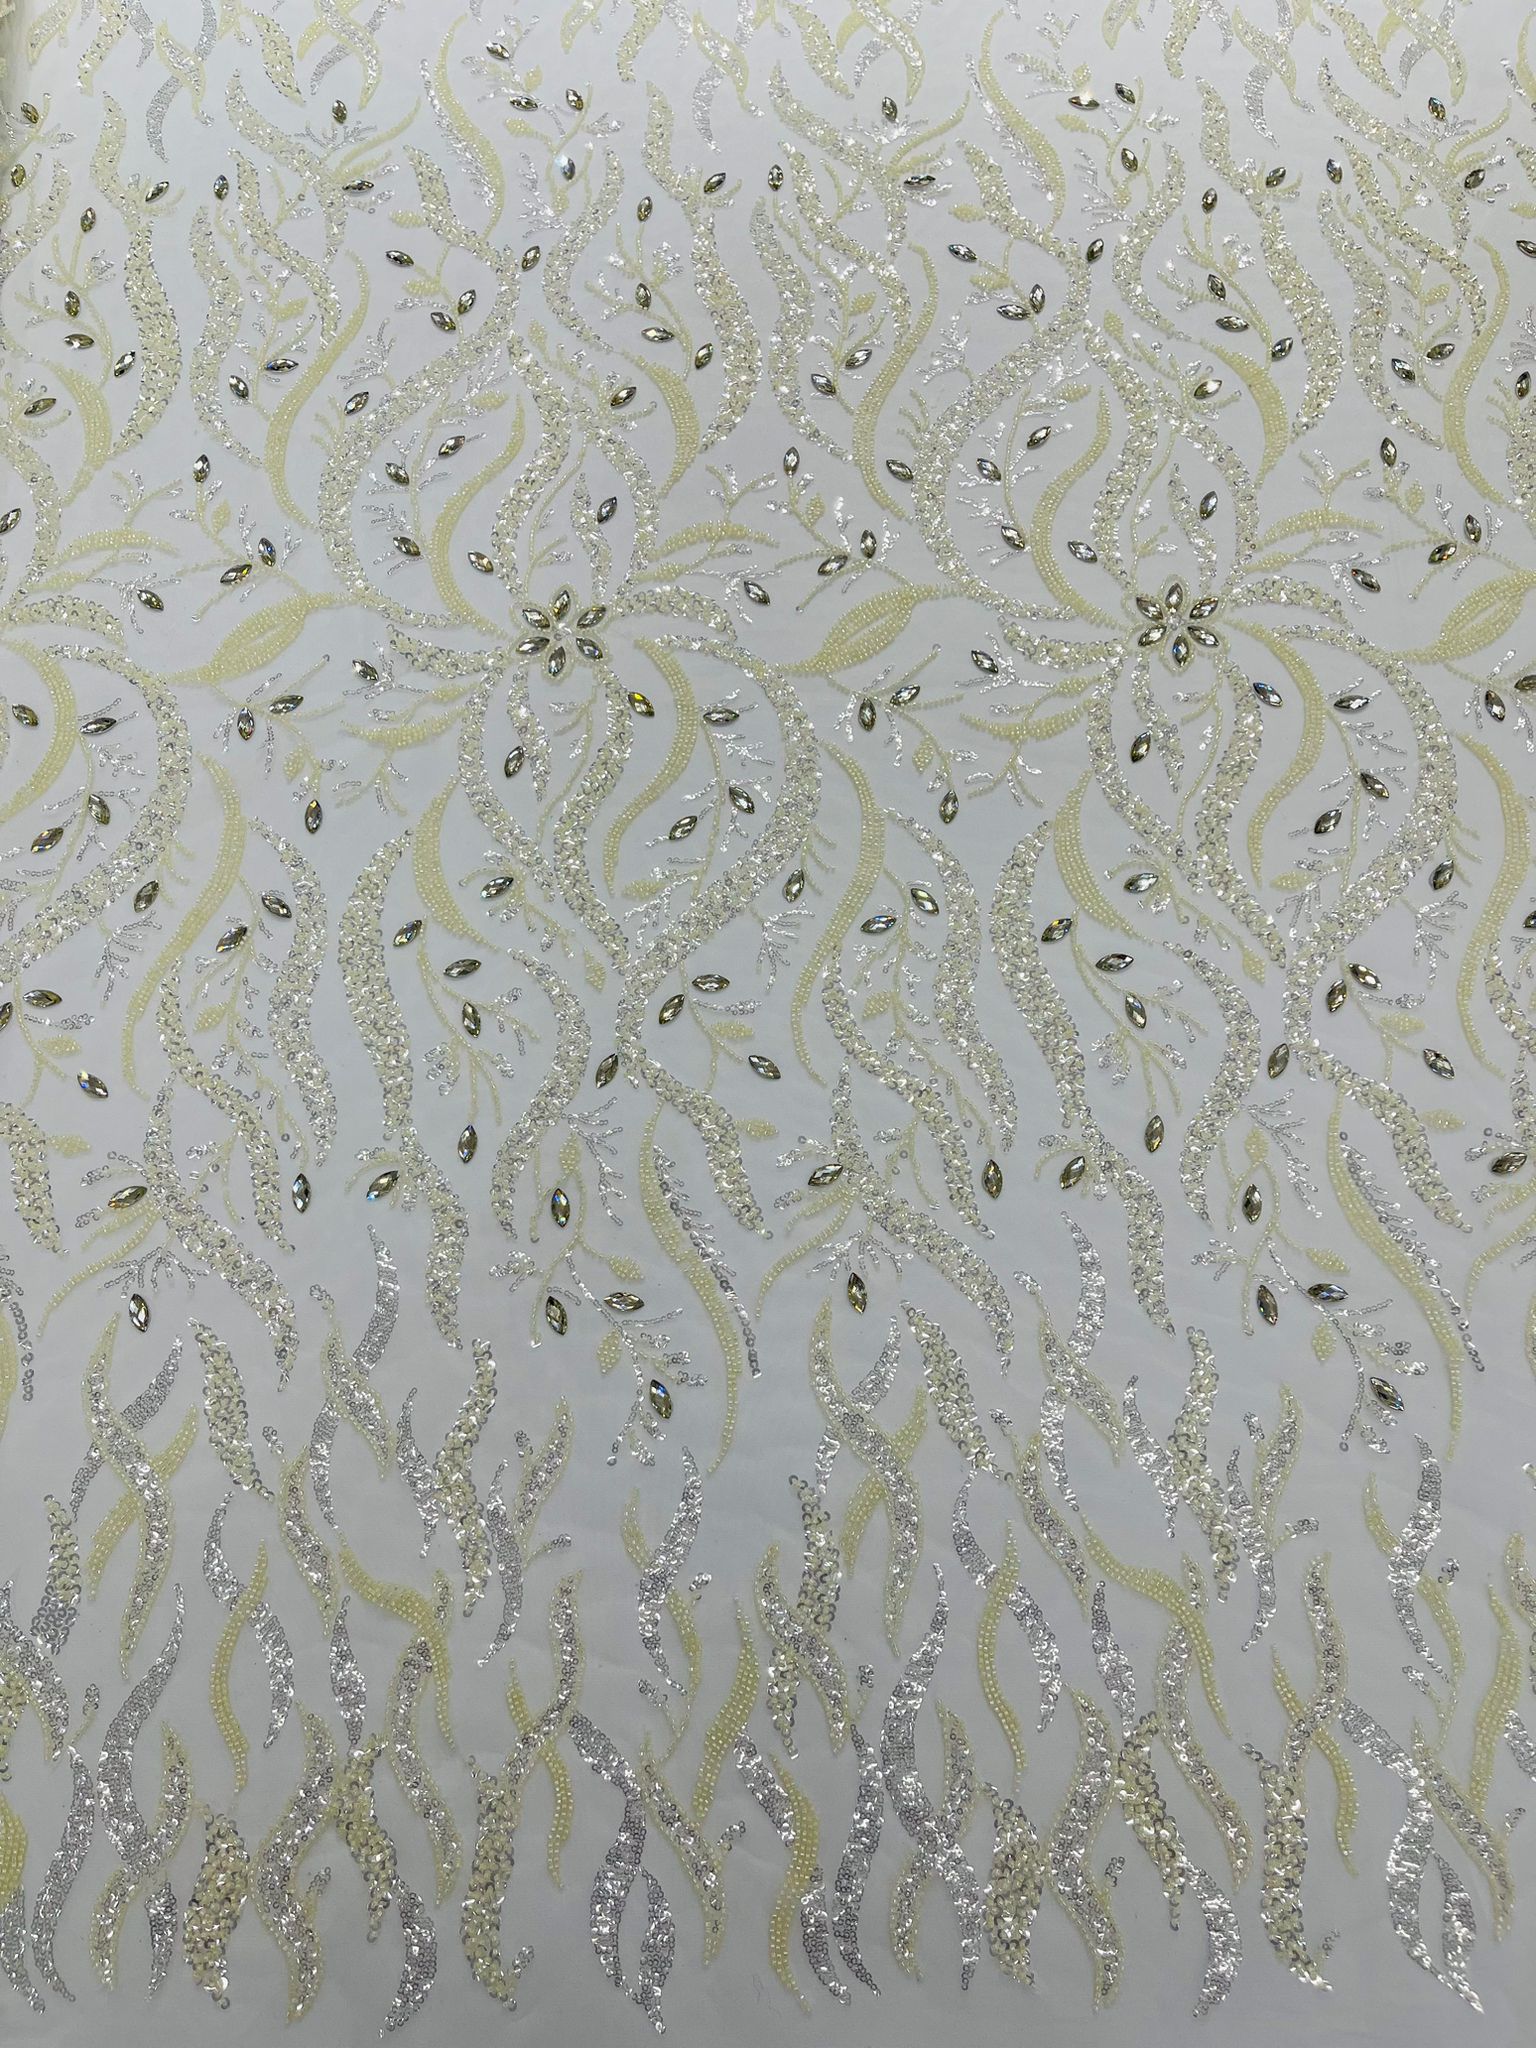 Ivory Vine Design Embroider And Heavy Beading/Sequins On A Mesh Lace Fabric/Wedding Lace/Costplay.